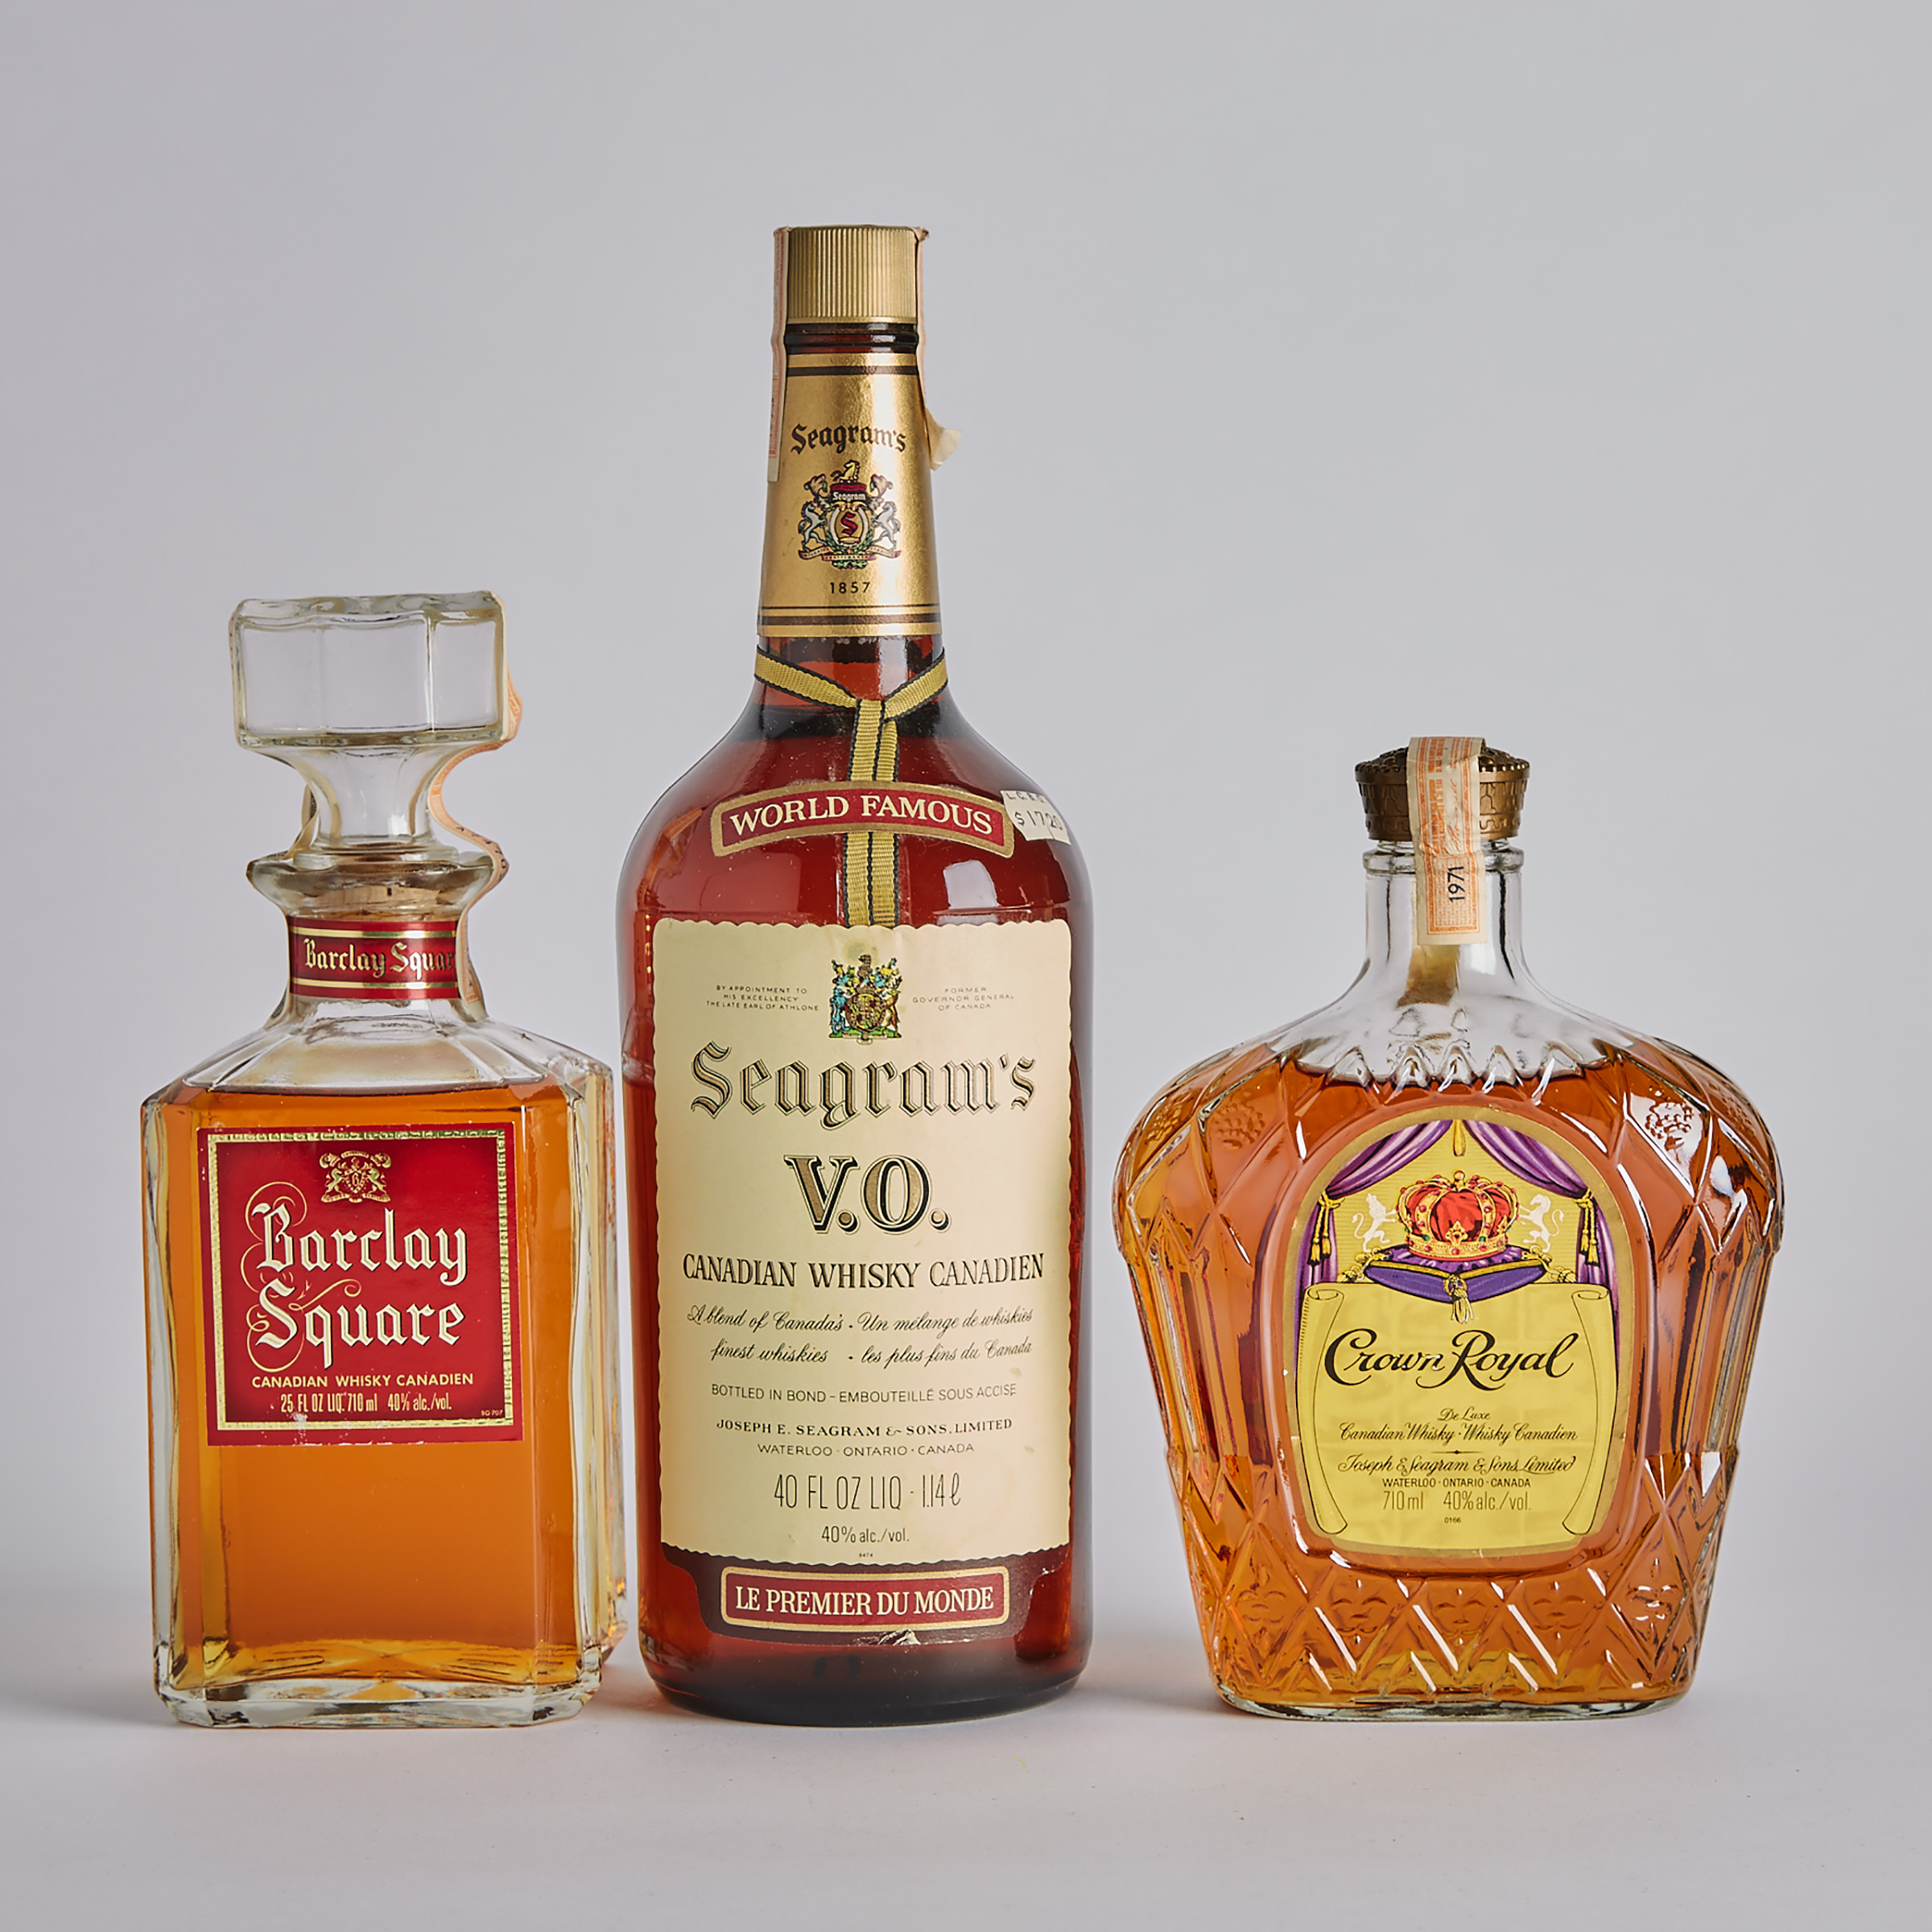 BARCLAY SQUARE CANADIAN WHISKY (ONE 710 ML)
CROWN ROYAL CANADIAN WHISKY (ONE 710 ML)
SEAGRAM'S VO CANADIAN WHISKY (ONE 1140 ML)